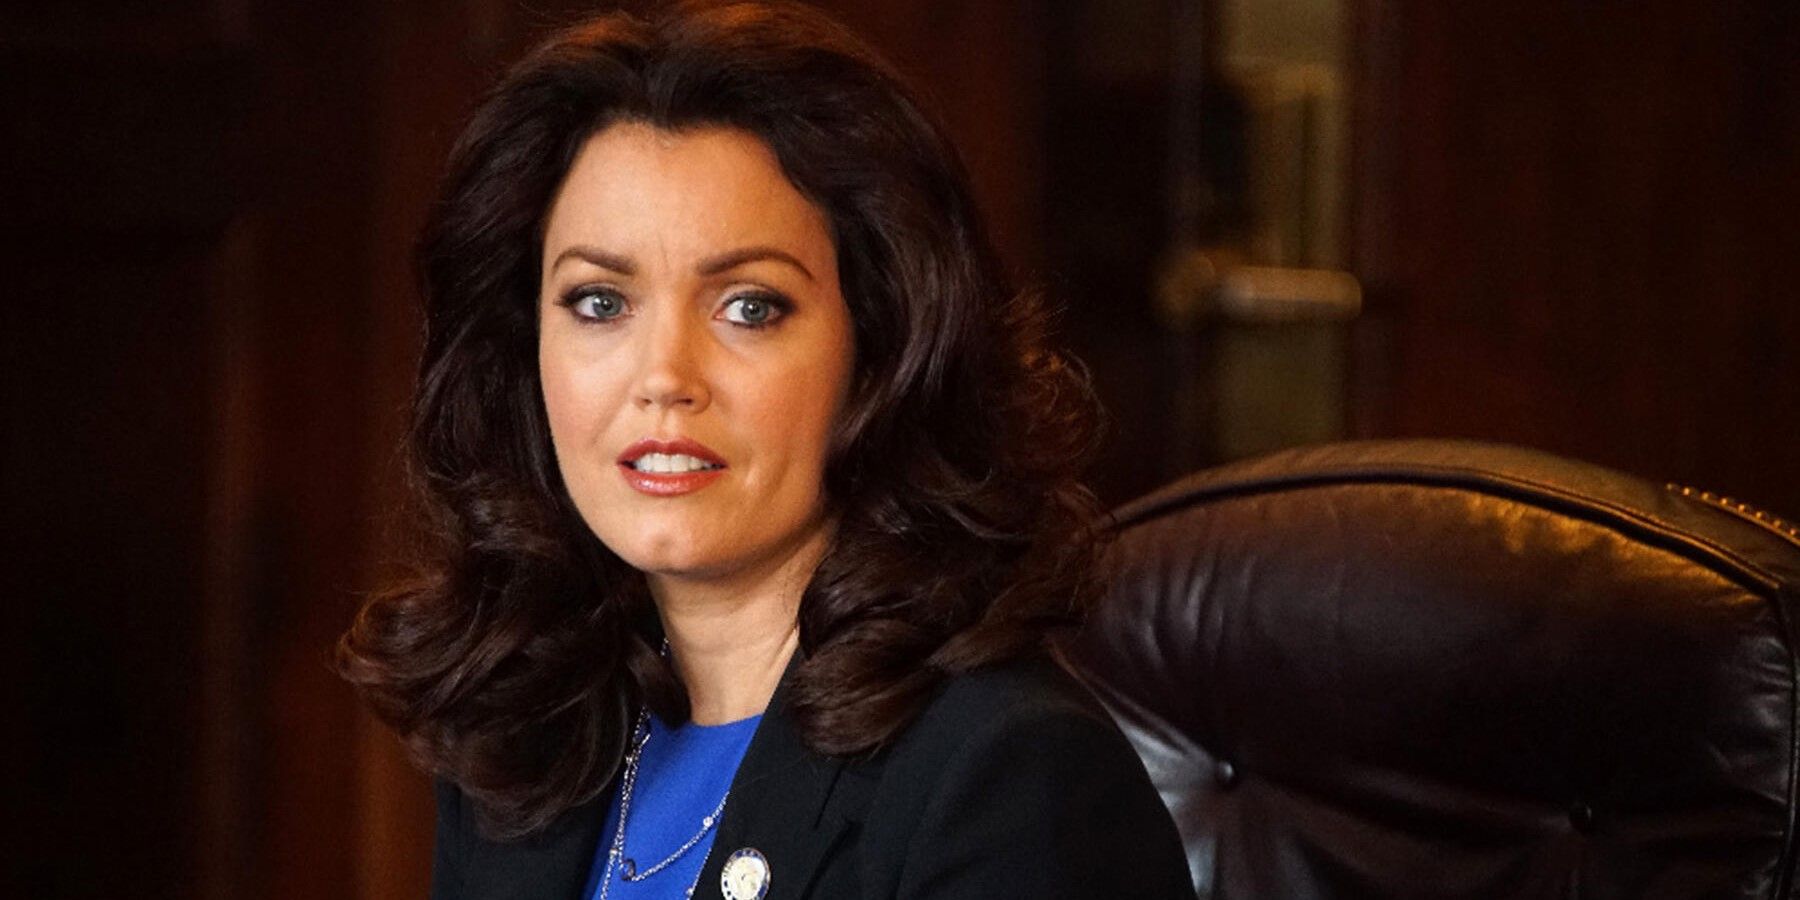 An image of Mellie Grant in Scandal